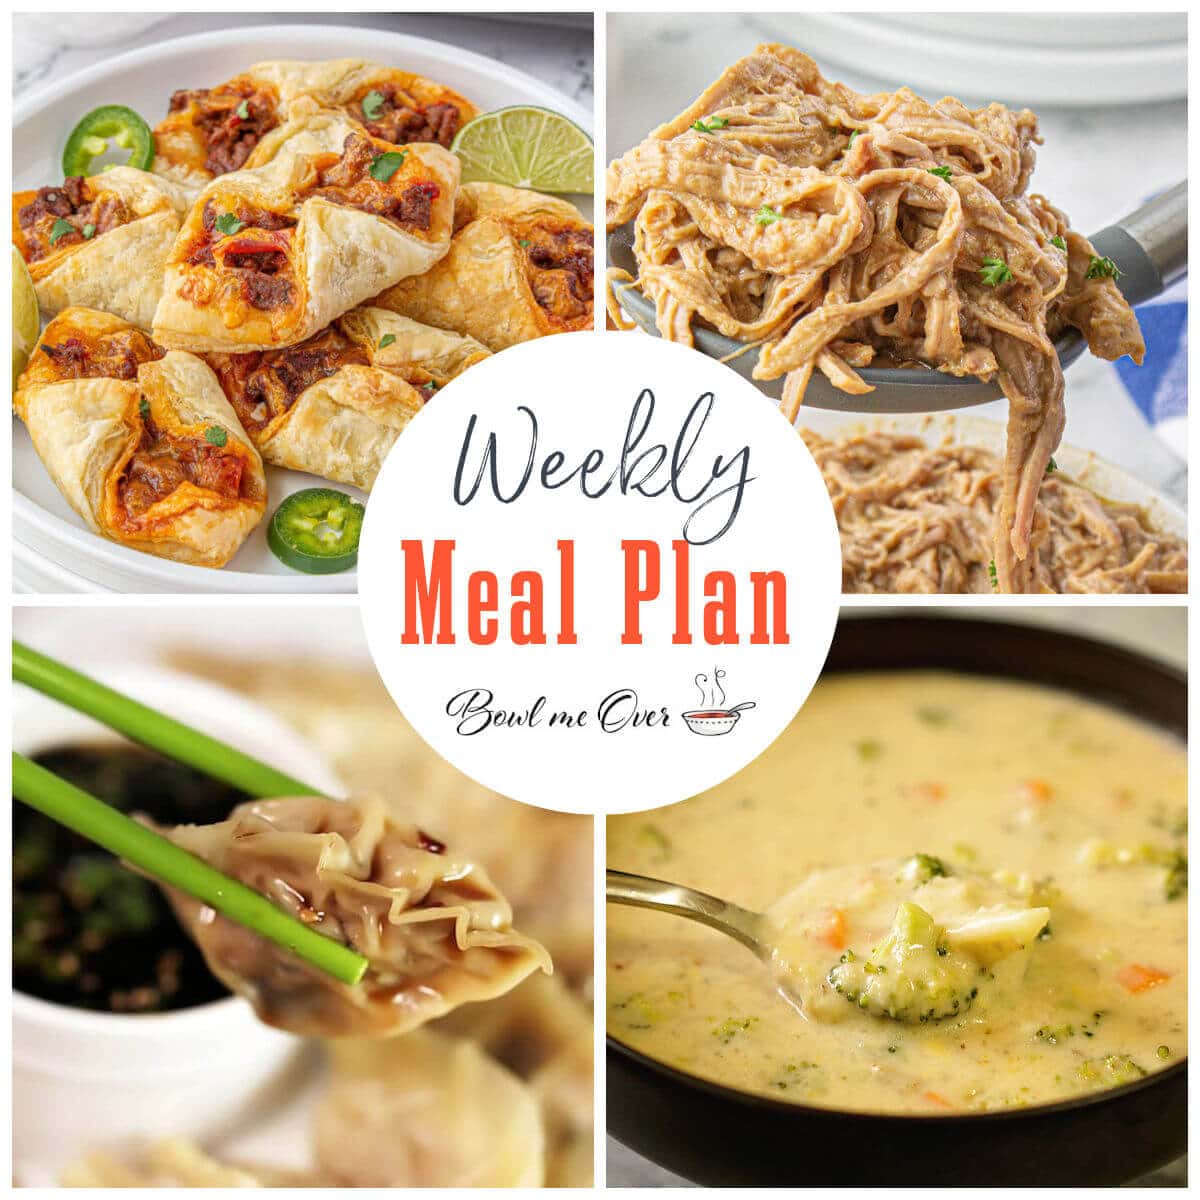 Collage of photos for Weekly Meal Plan 15, with print overlay.